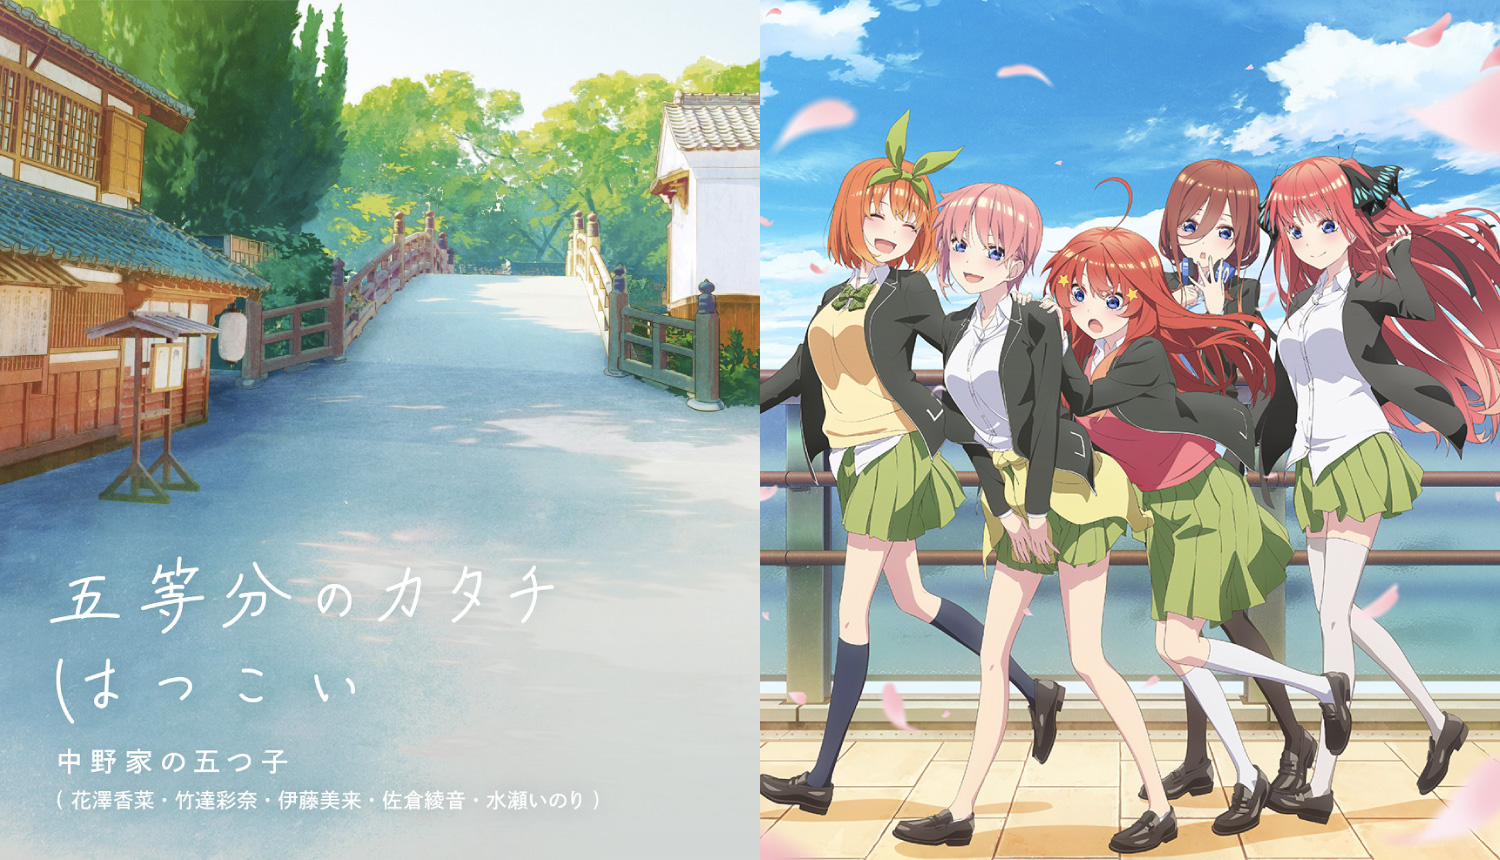 The Quintessential Quintuplets Special Event to be Streamed Online, MOSHI  MOSHI NIPPON